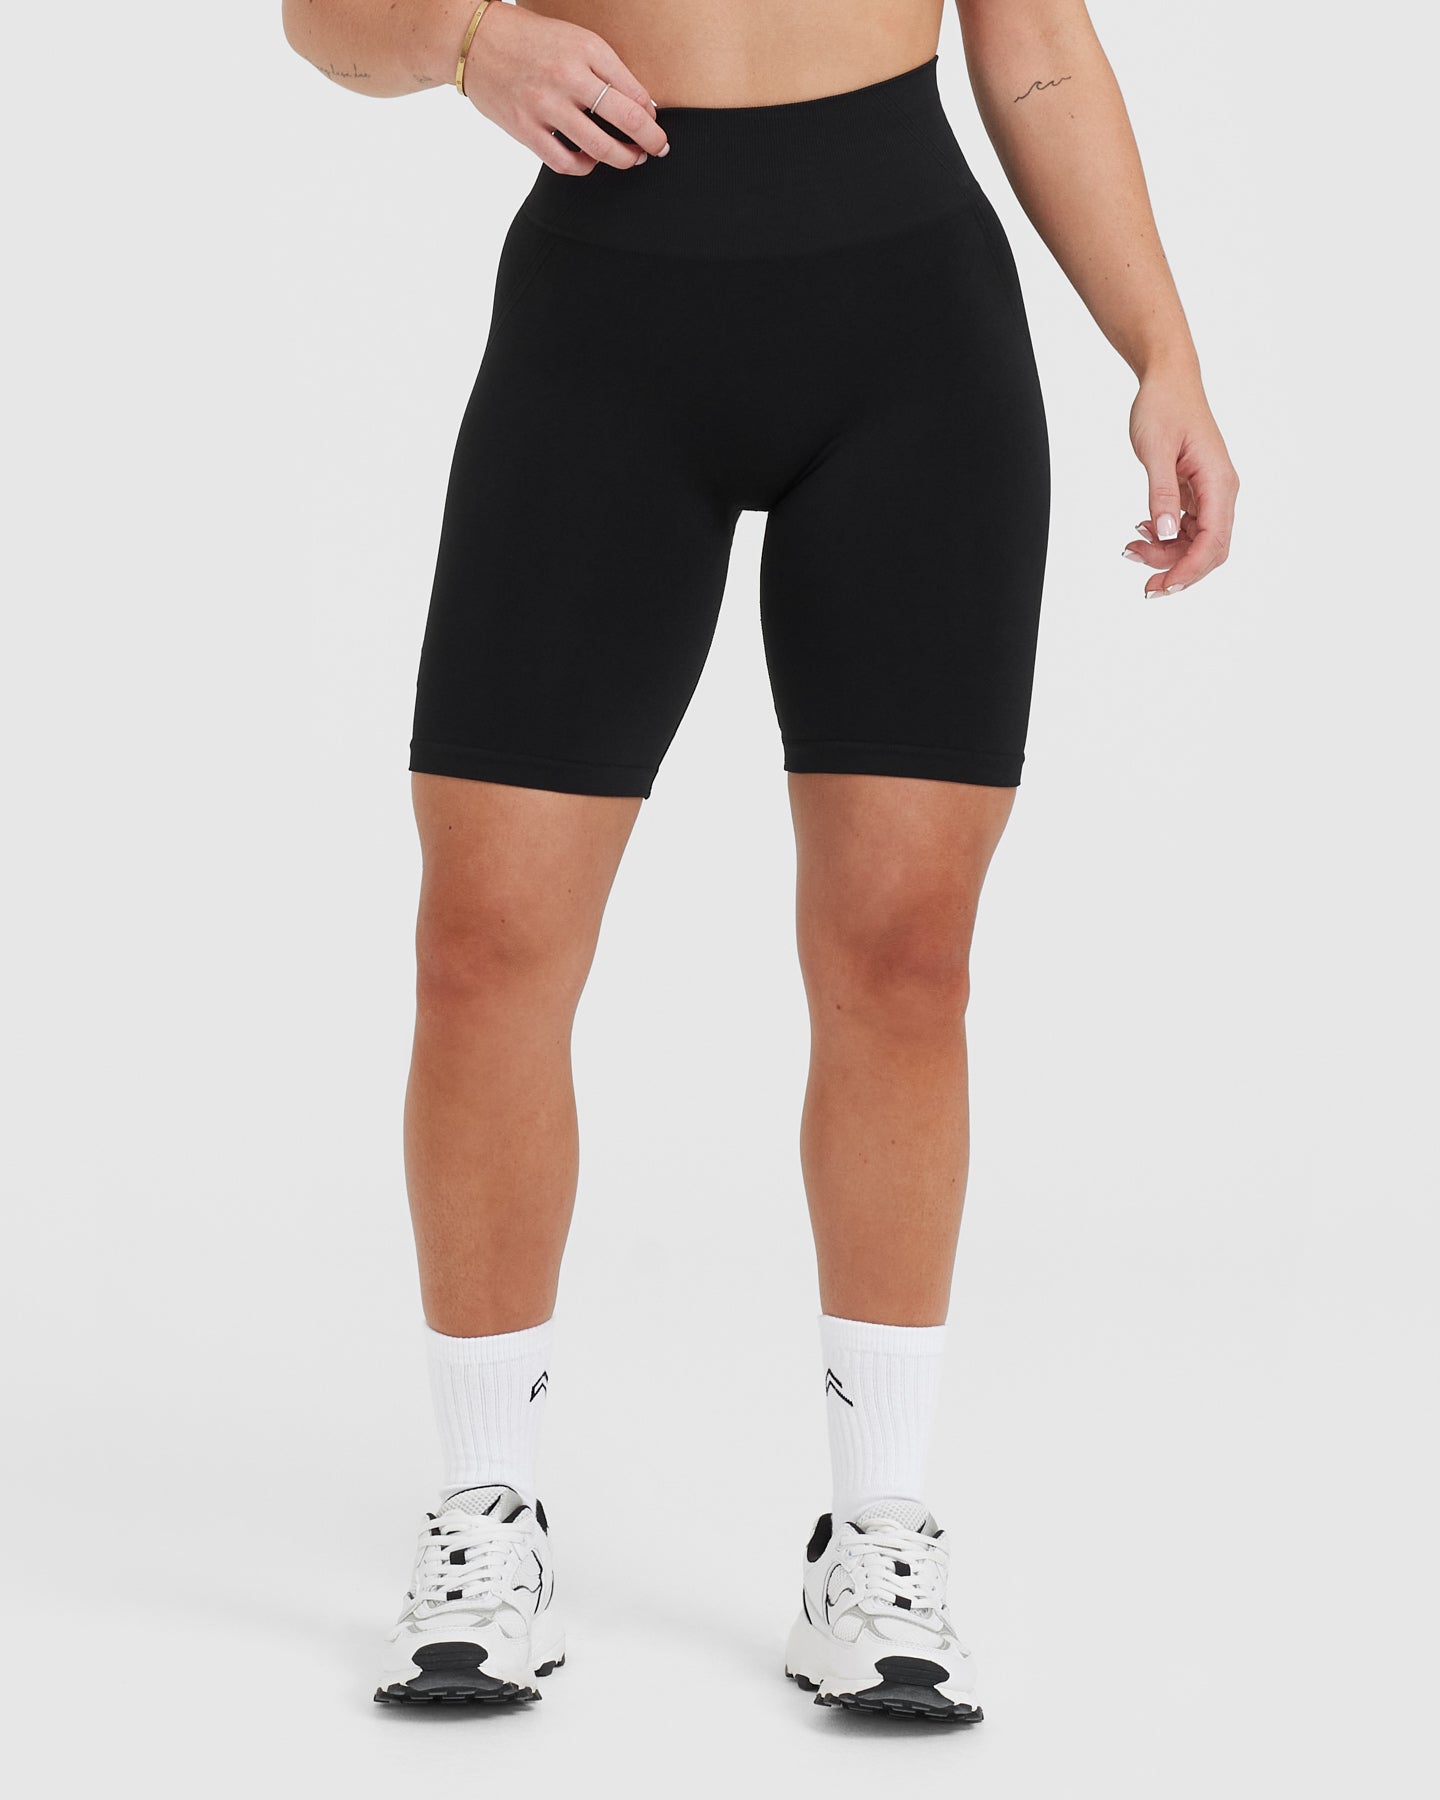 HIGH WAISTED BLACK CYCLING SHORTS - lightweight | Oner Active US